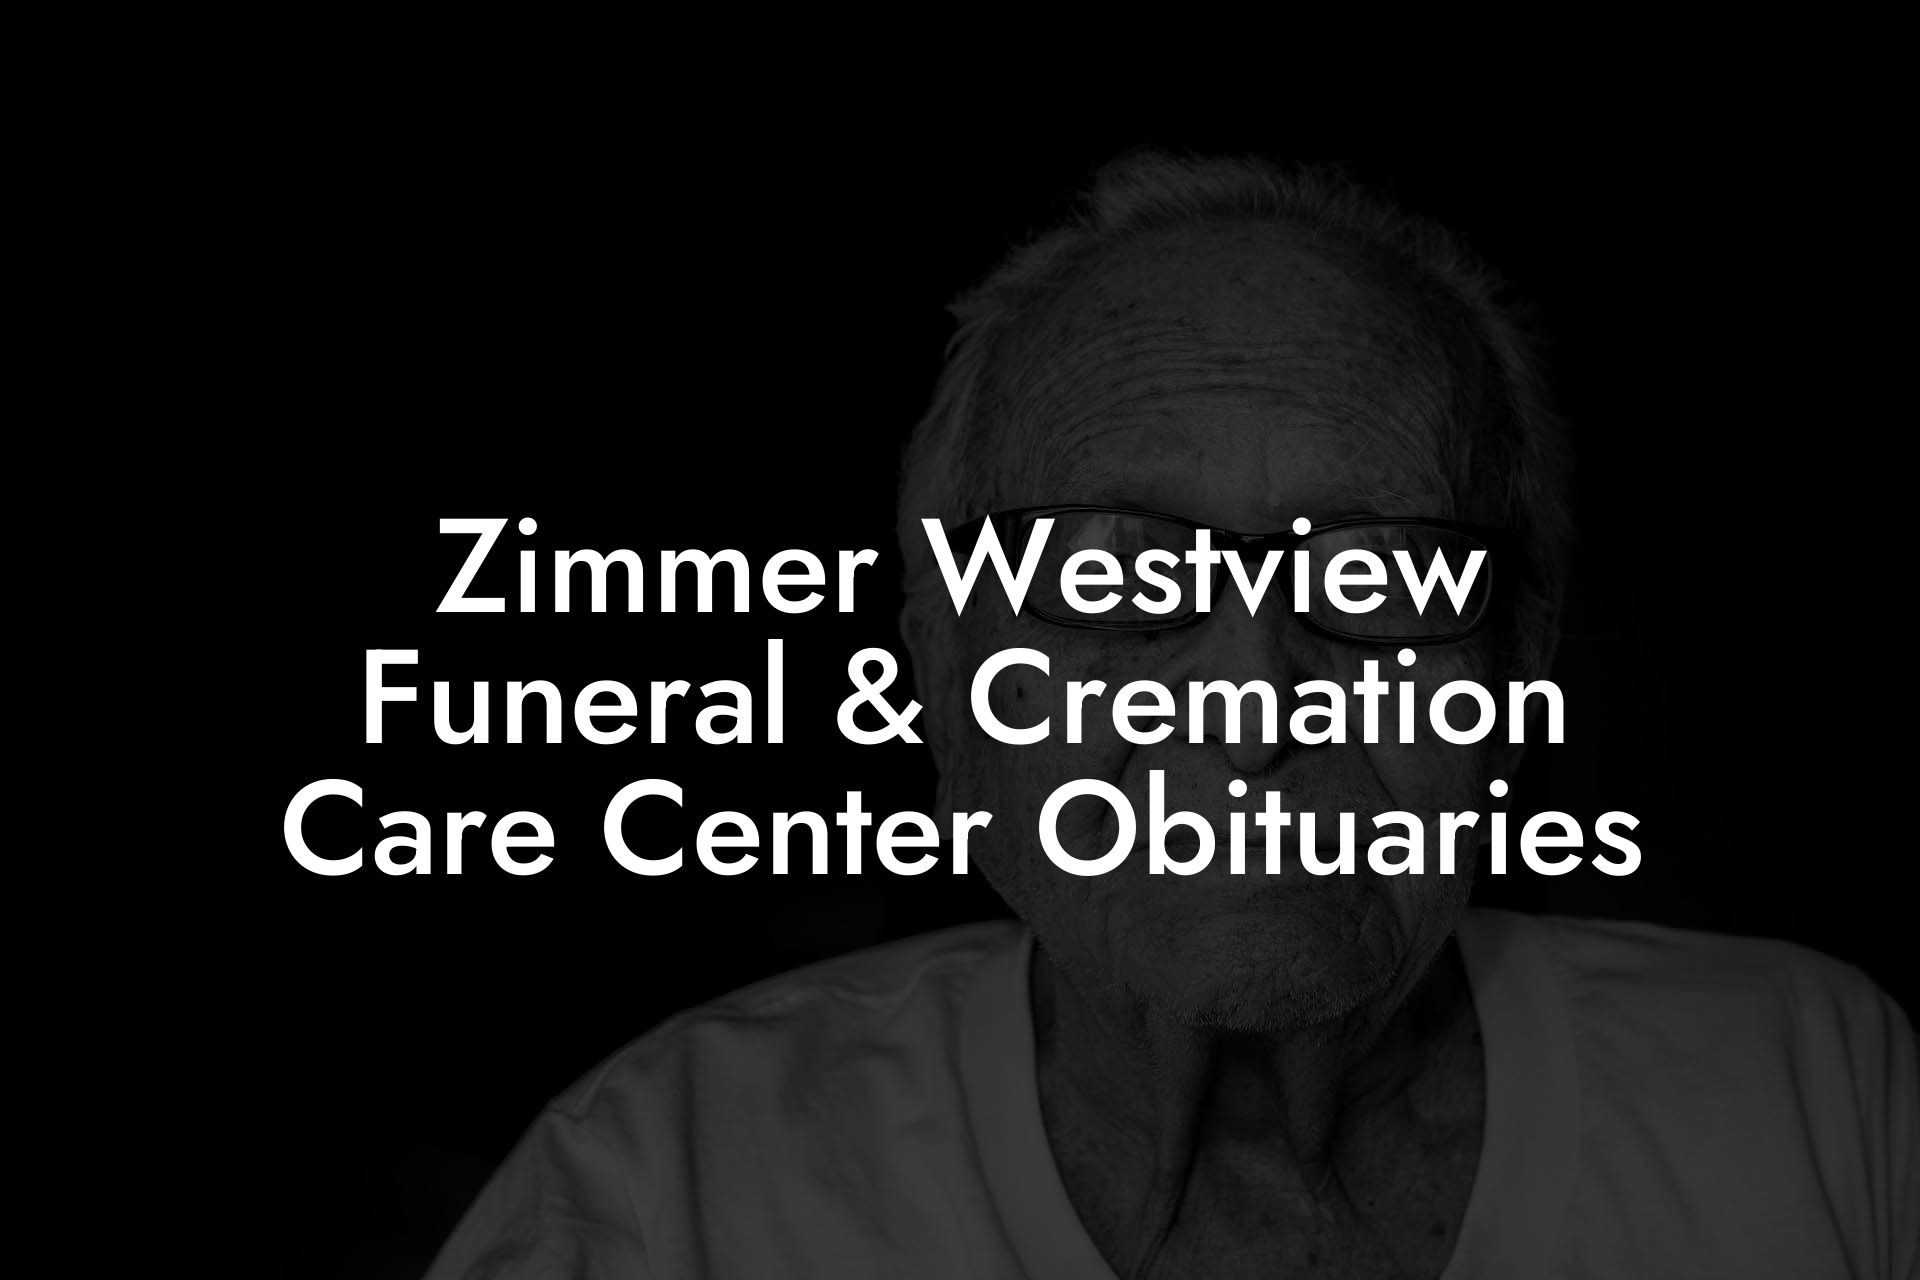 Zimmer Westview Funeral & Cremation Care Center Obituaries